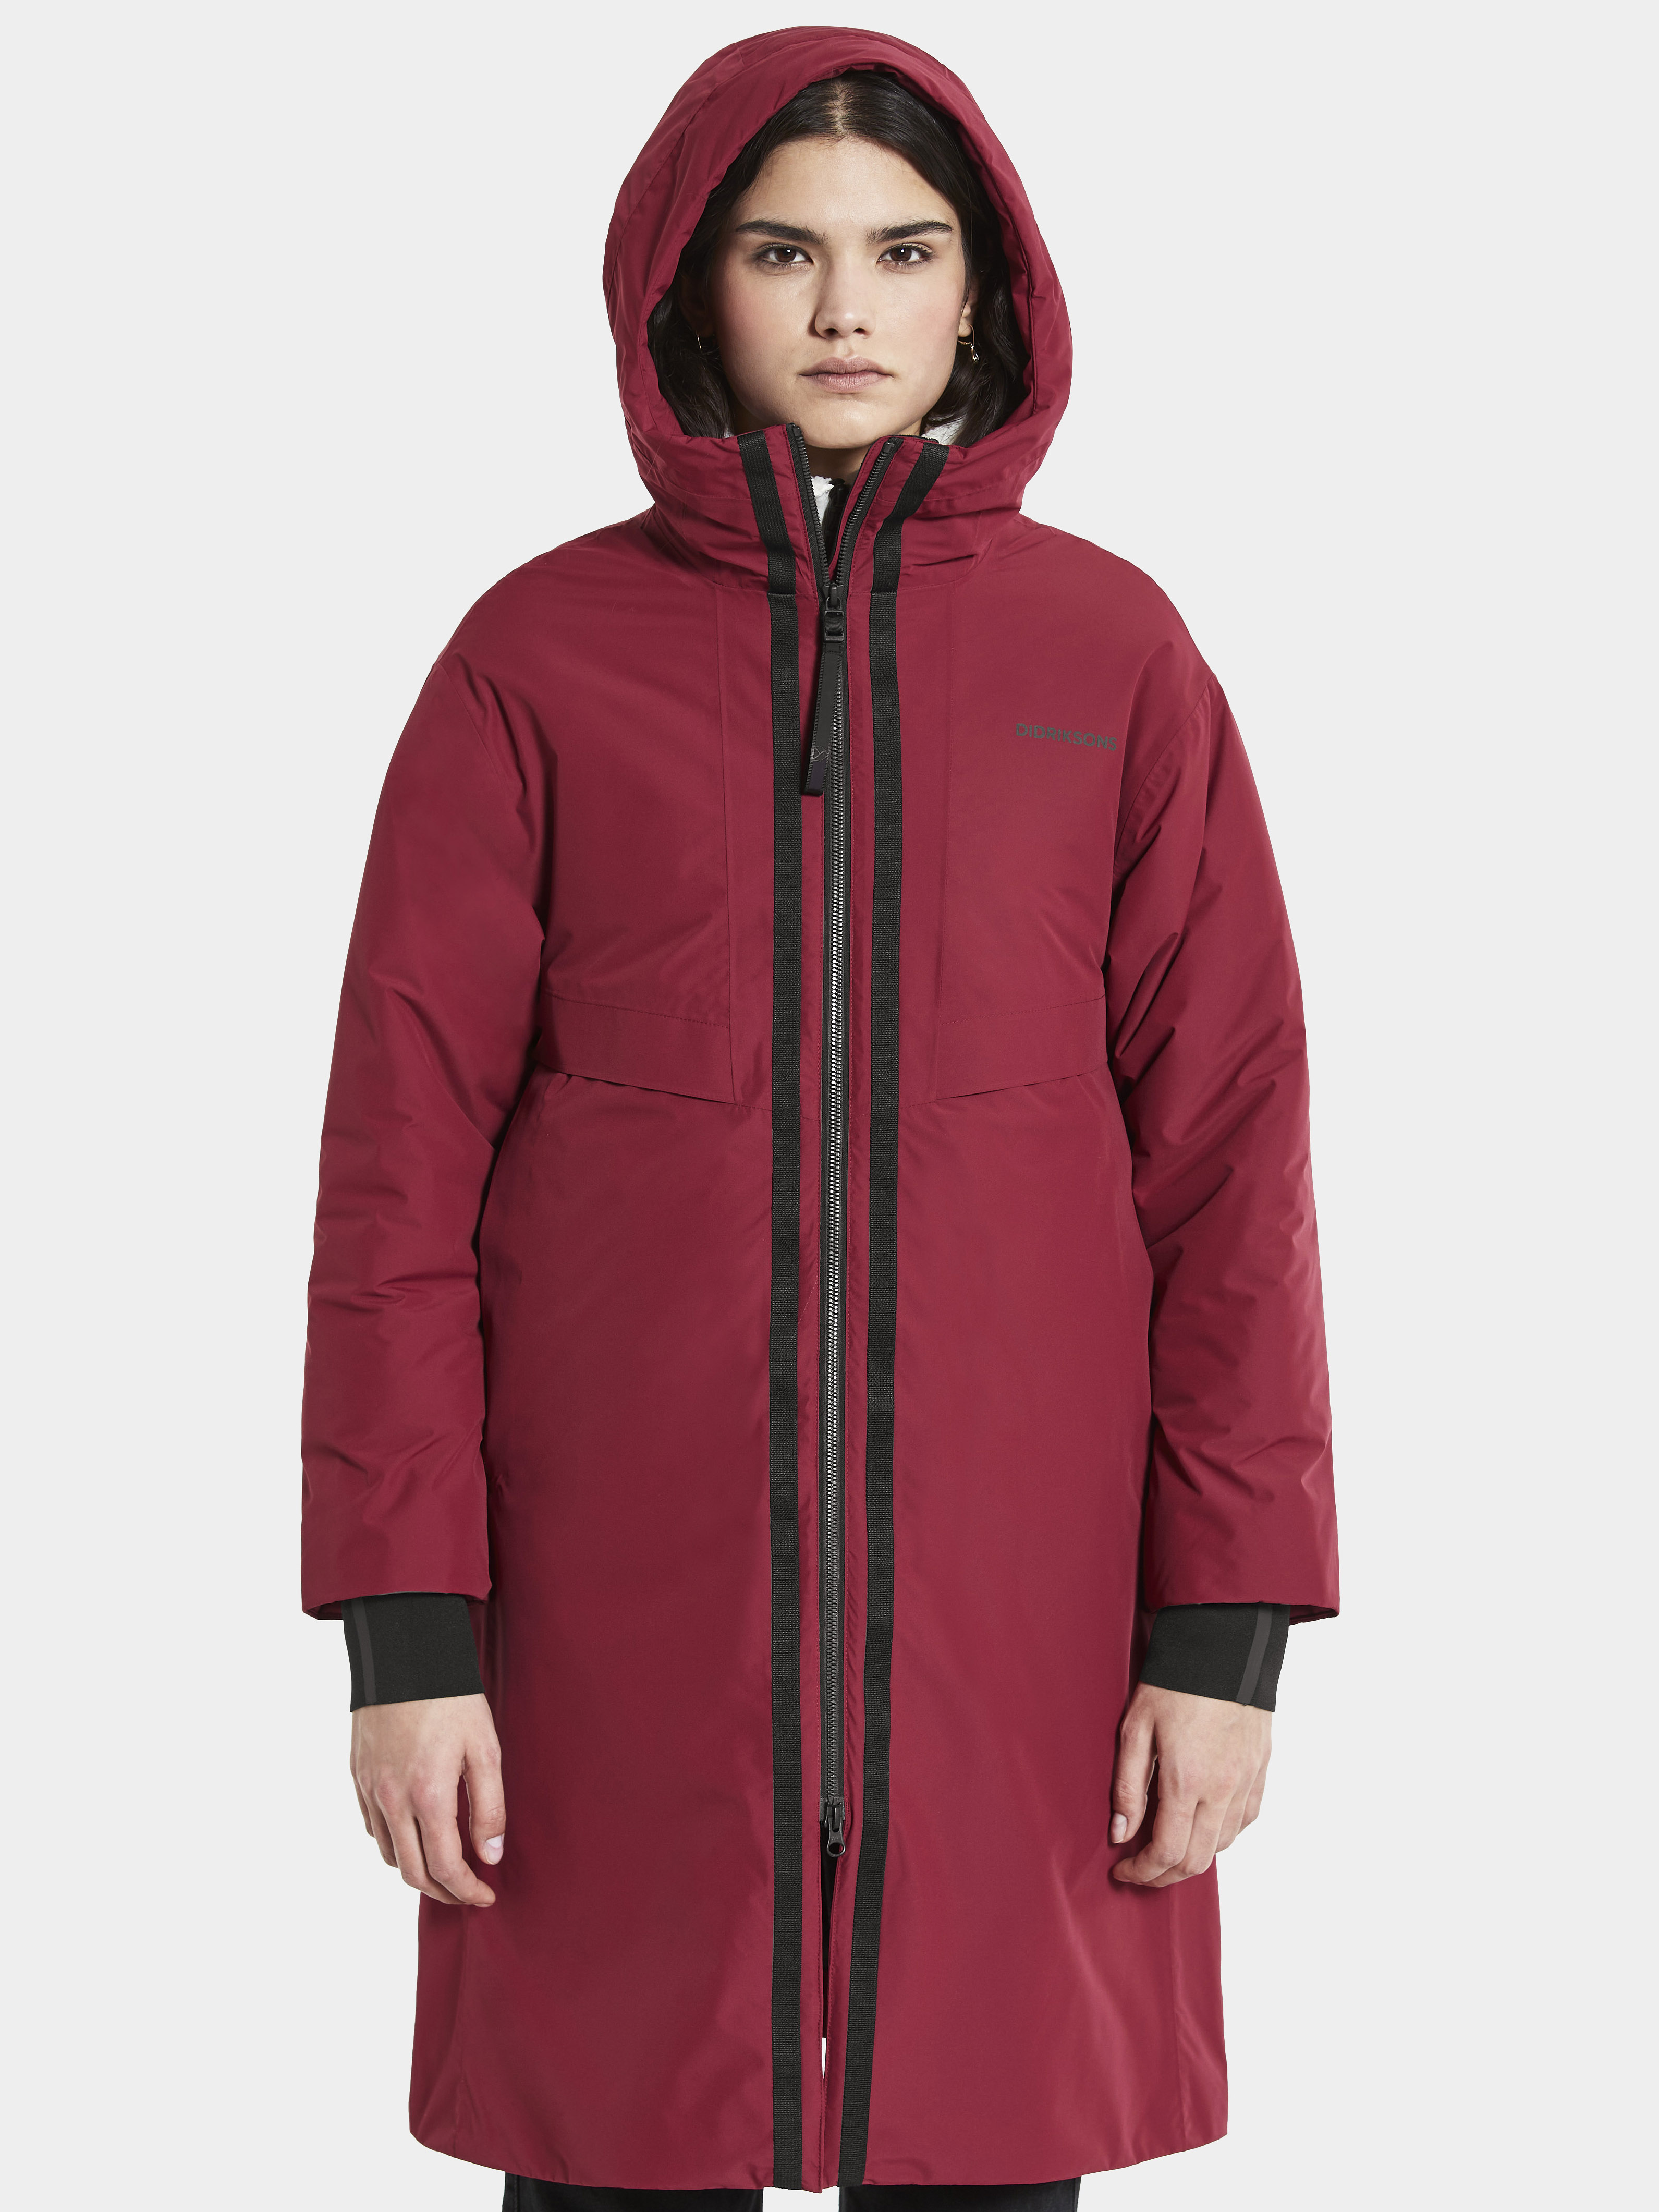 Aino Women's Parka 4 Ruby Red | Buy Aino Women's Parka 4 Ruby Red here |  Outnorth